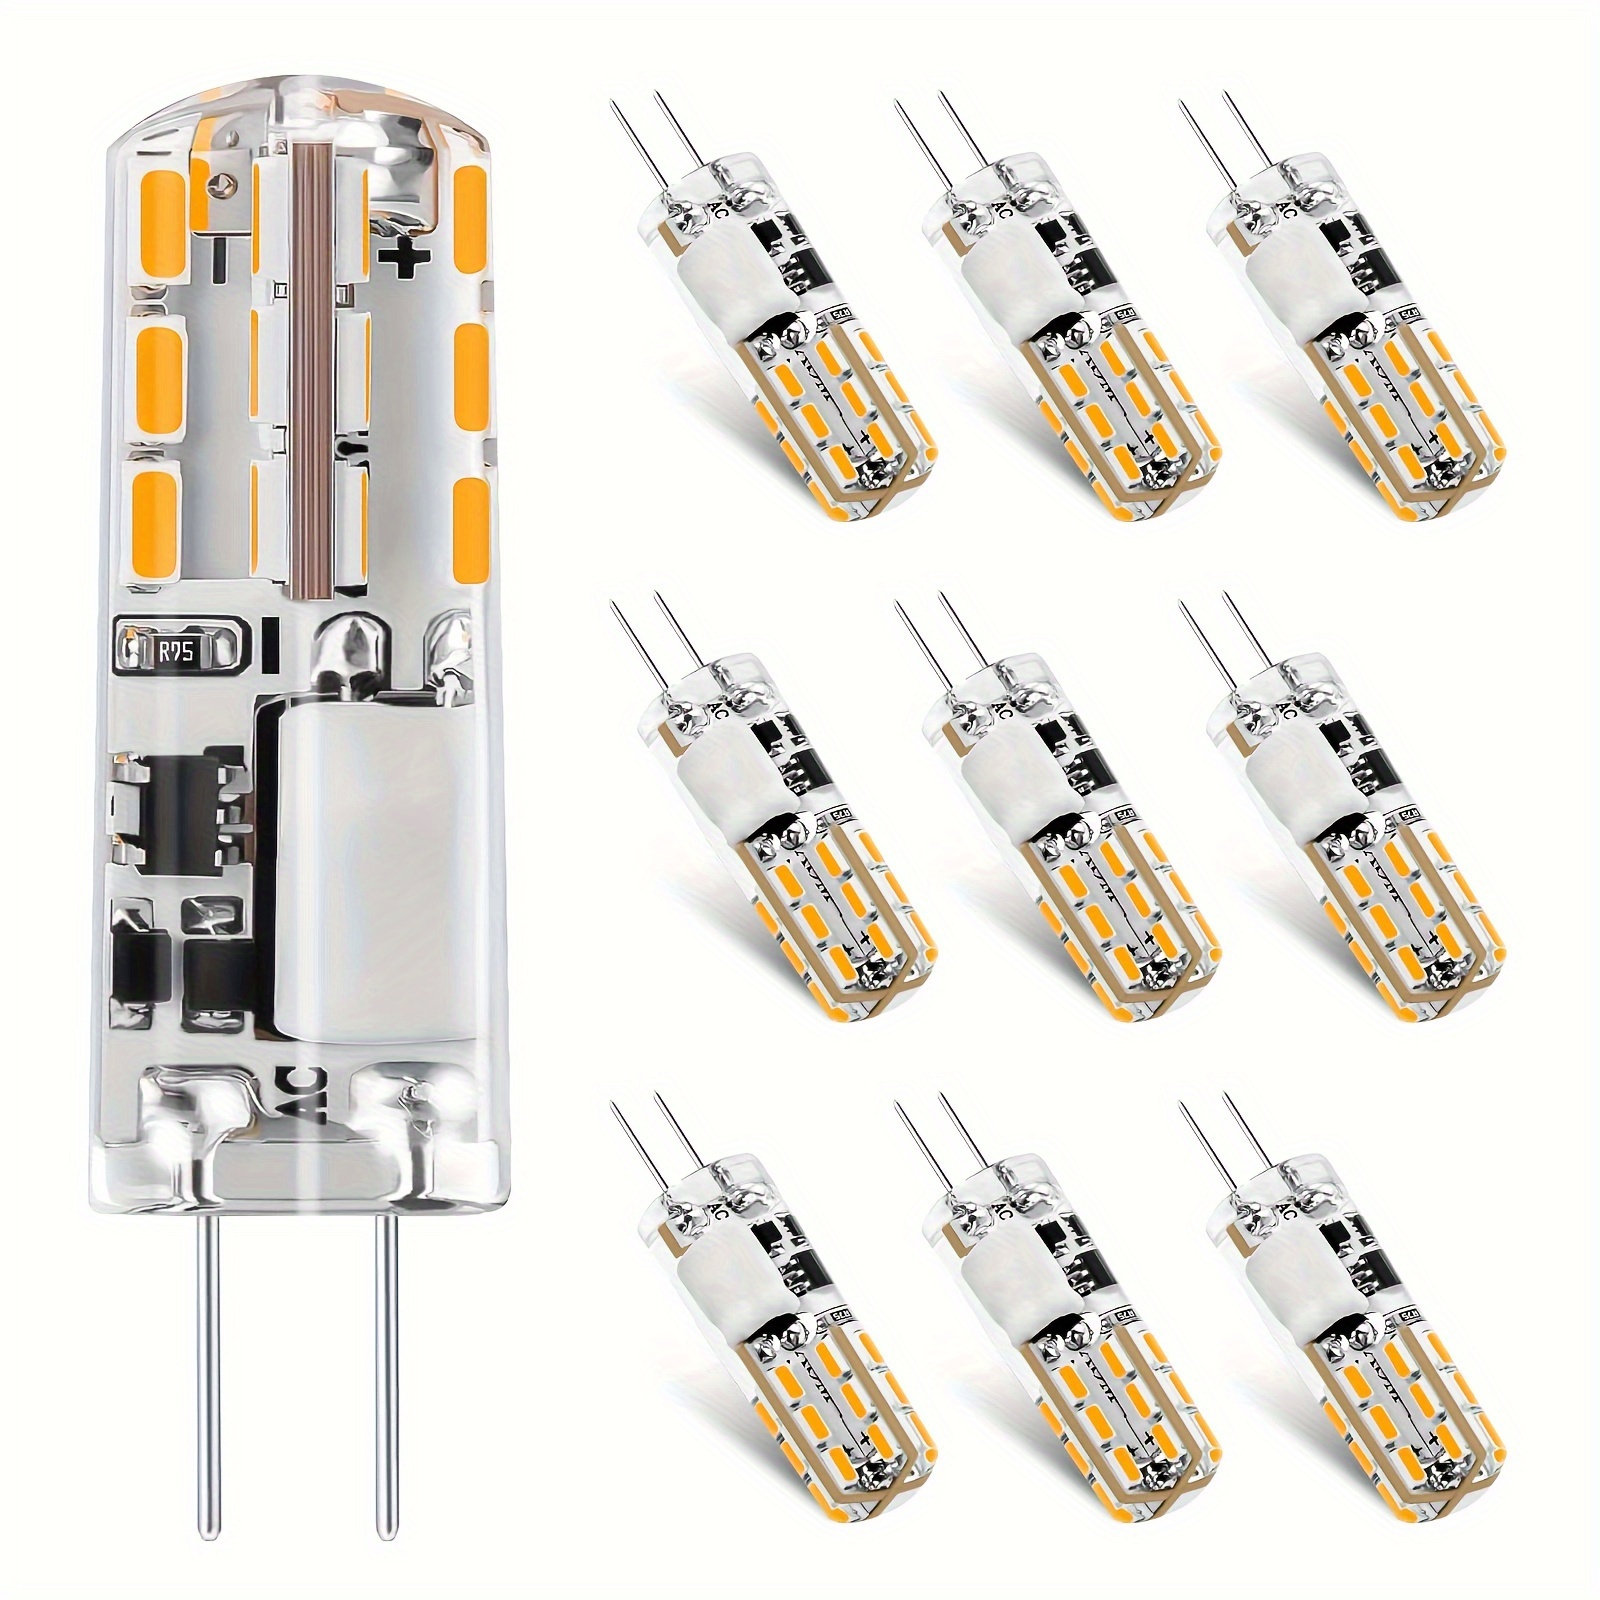 

10pcs, G4 Led Bulbs, 1.5w - 2w Ac/dc 12v Bi-pin Base, Warm White 2700k - 3000k, Cool White 6000k, Non Dimmable, Suitable For Chandeliers Table Lamps Bedside Lamps Wall Lamps Crystal Lamps